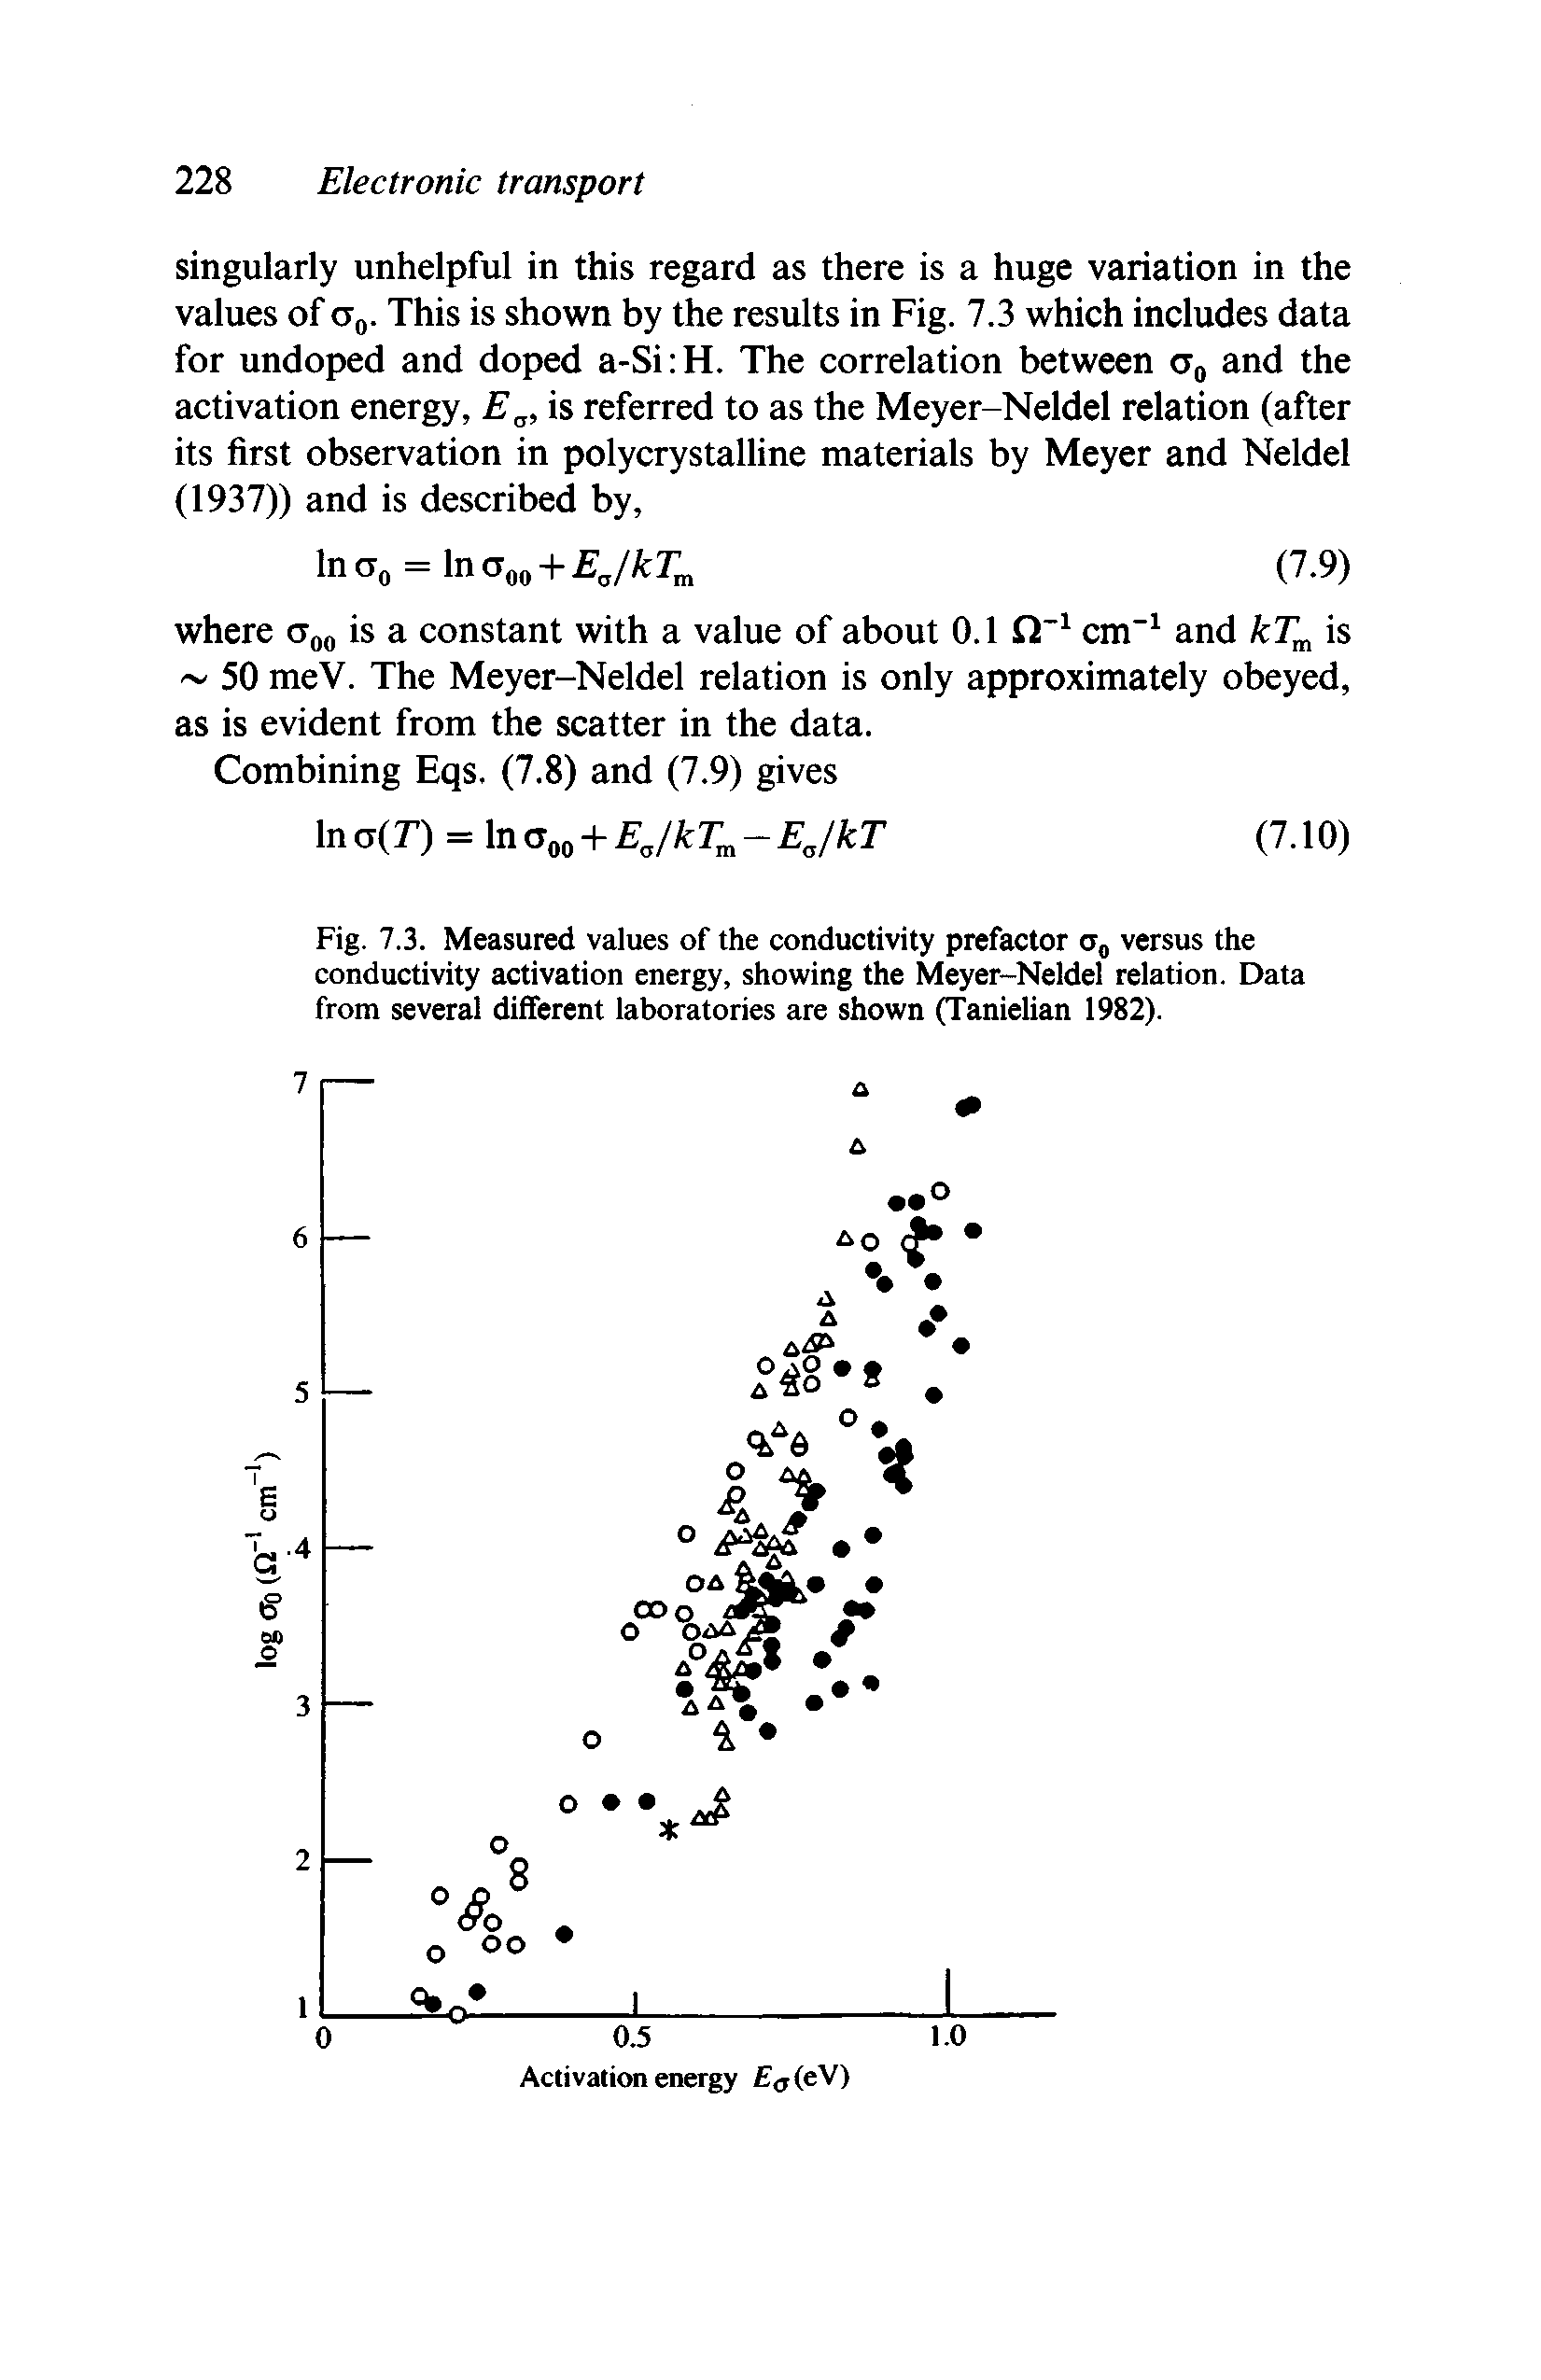 Fig. 7.3. Measured values of the conductivity prefactor a, versus the conductivity activation energy, showing the Meyer-Neldel relation. Data from sever different laboratories are shown (Tanielian 1982).